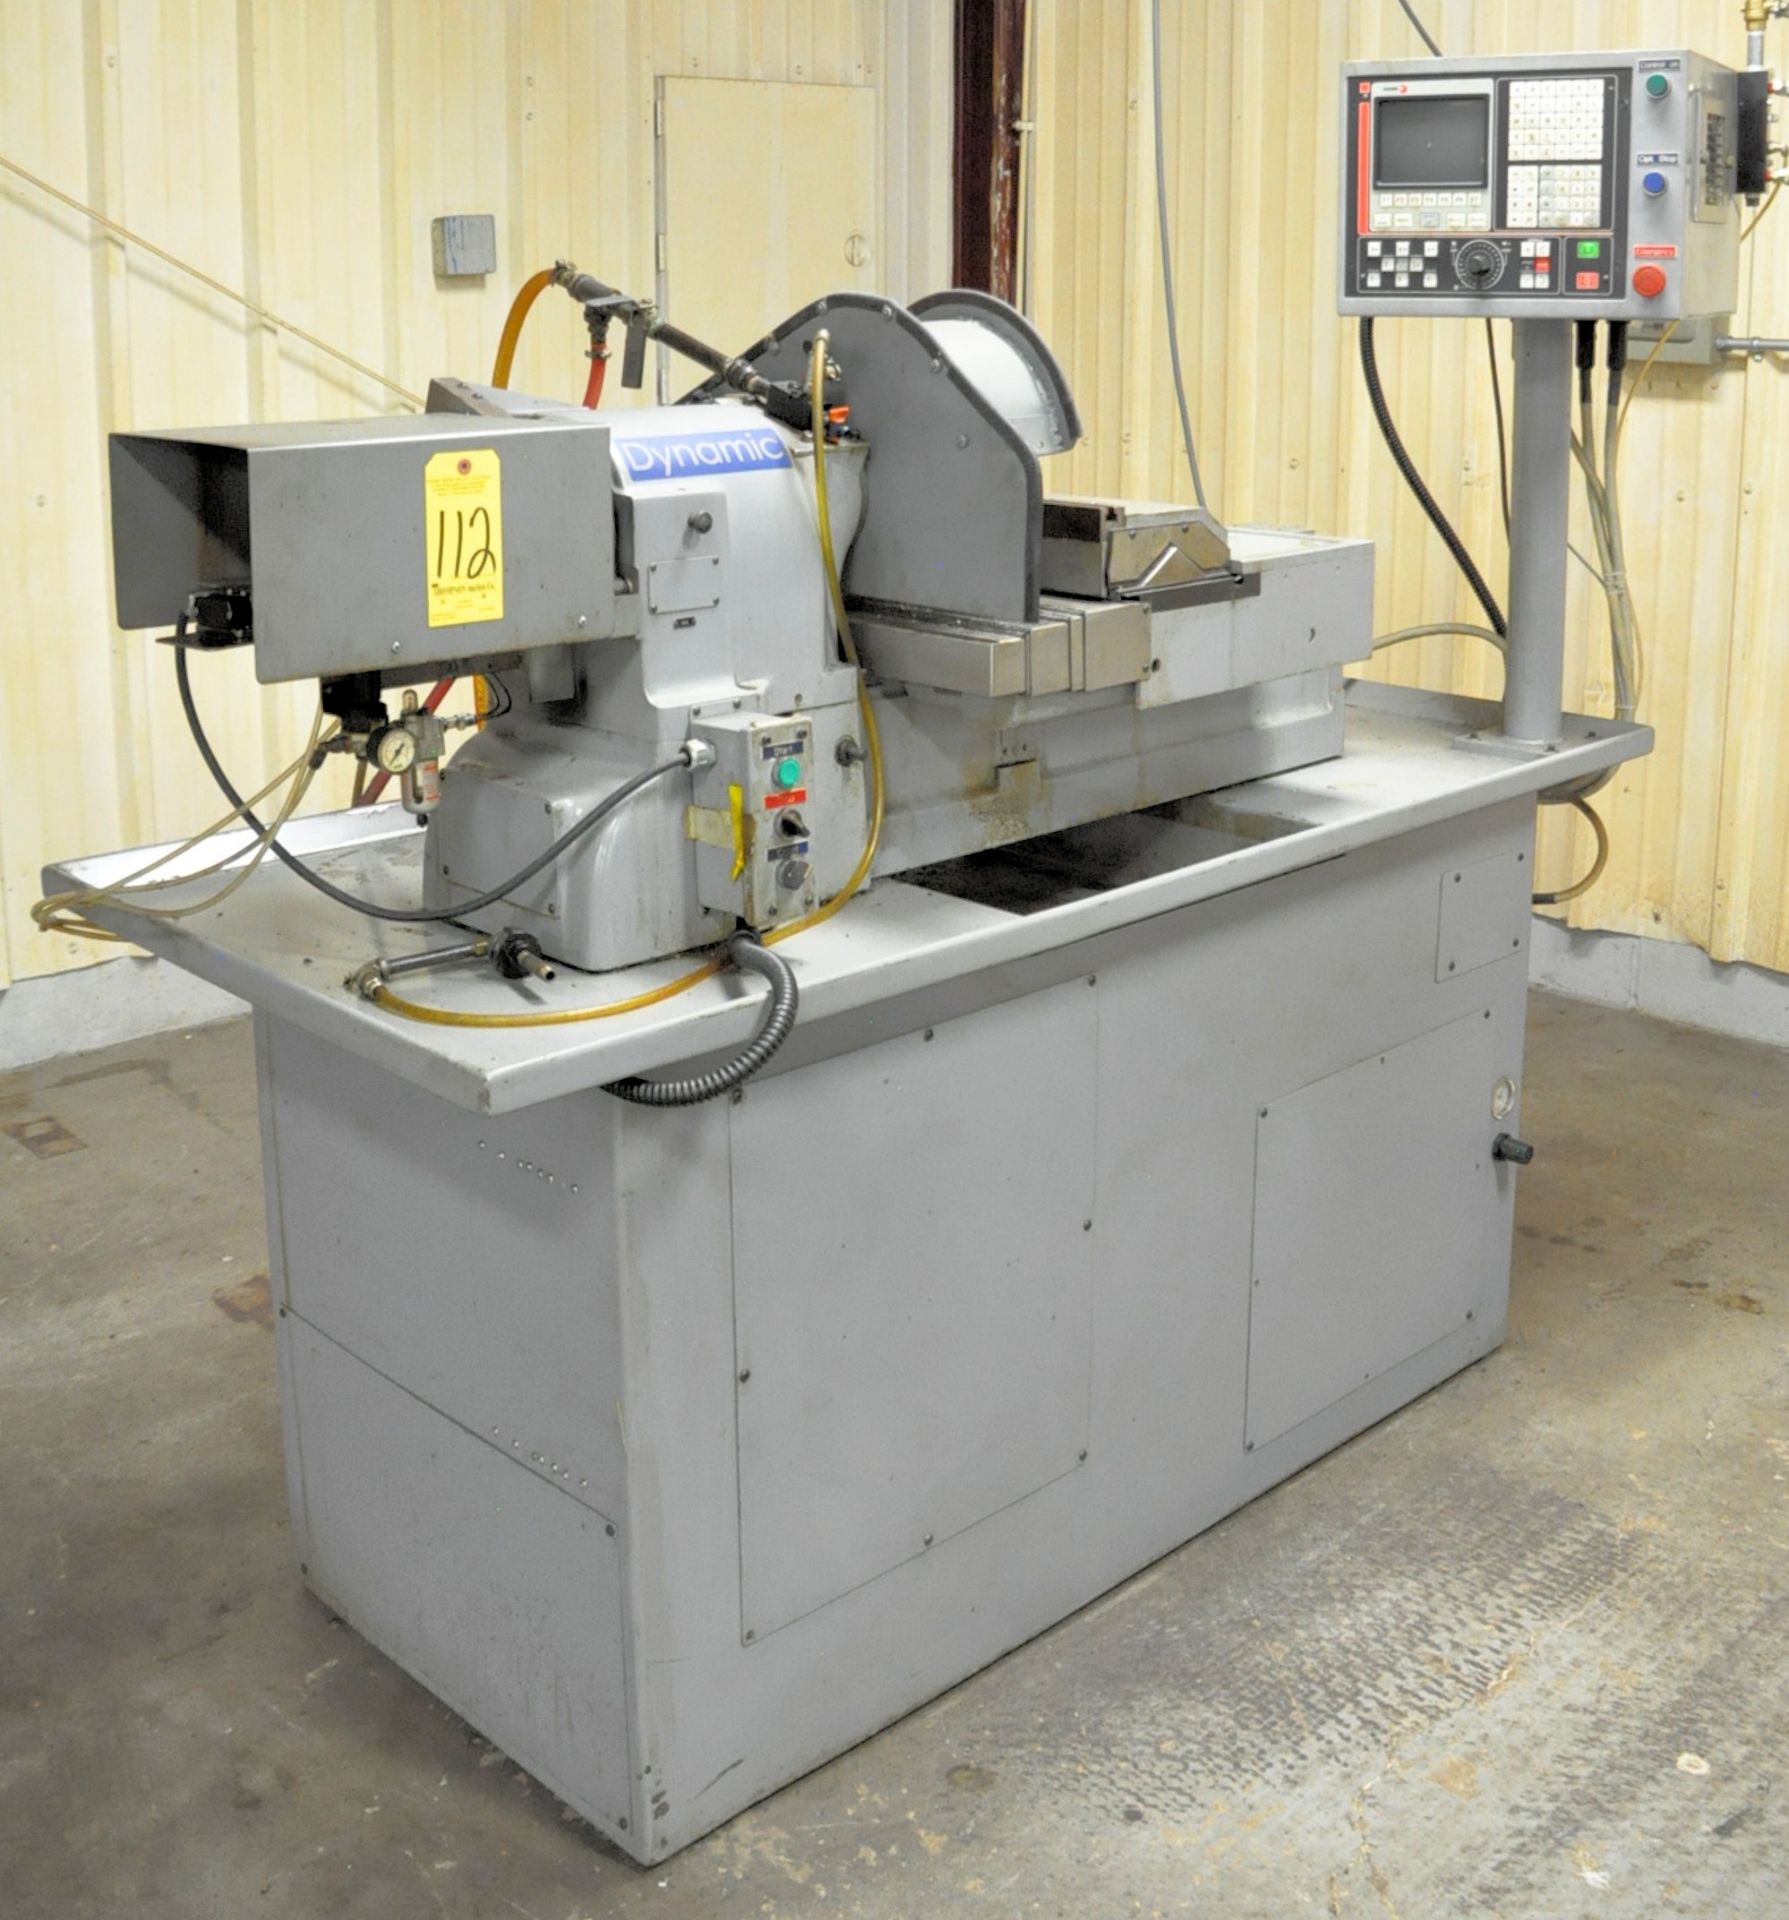 Dynamic Model RS-Accuslide CNC Lathe, S/n DYN-RS-123211-45, Fagor CNC Controller, 2-Axis - Image 2 of 7